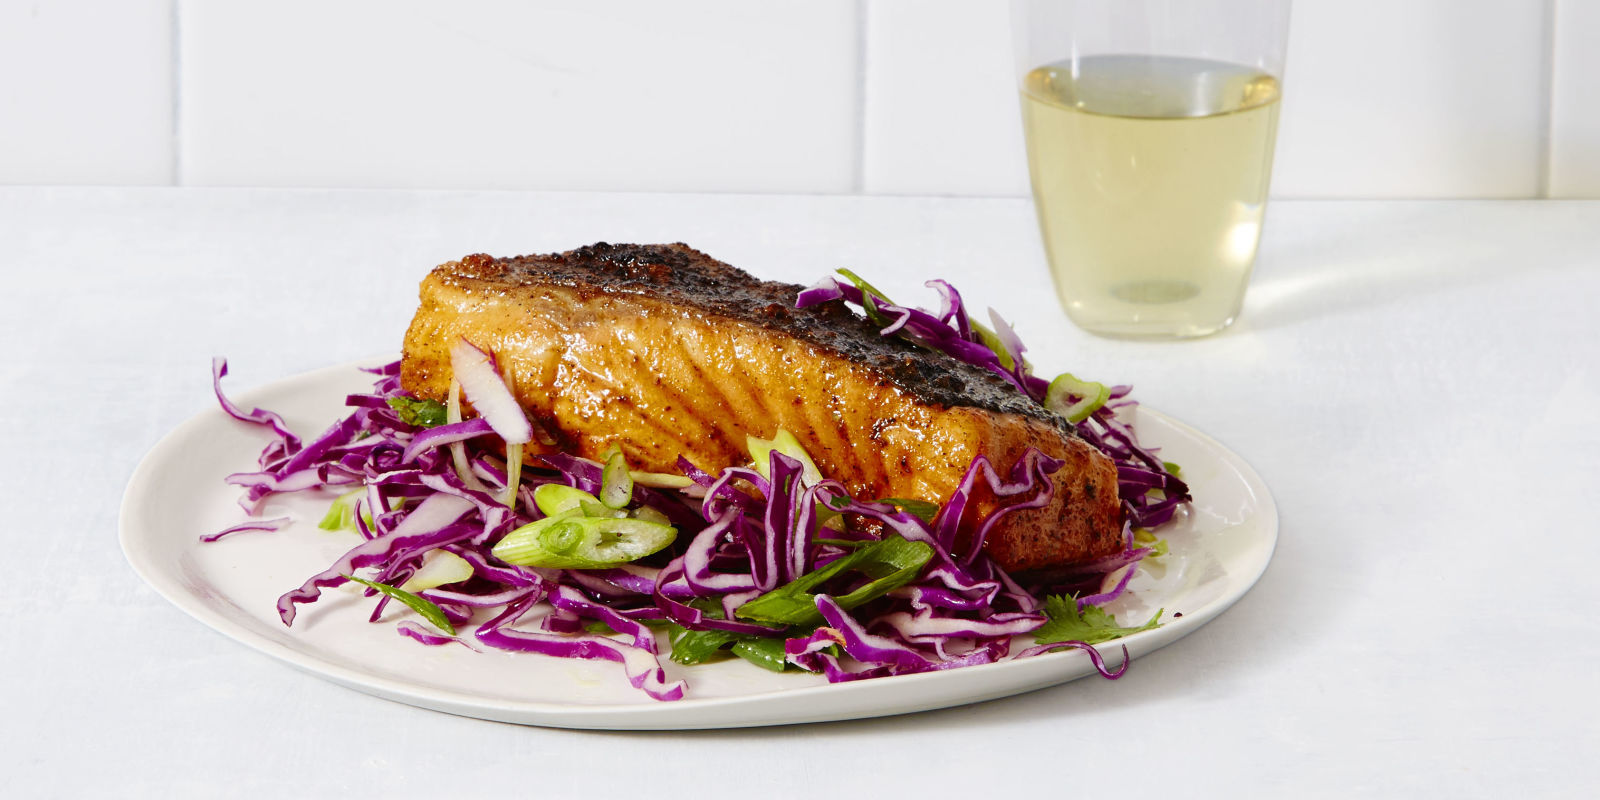 Spicy Salmon with Slaw